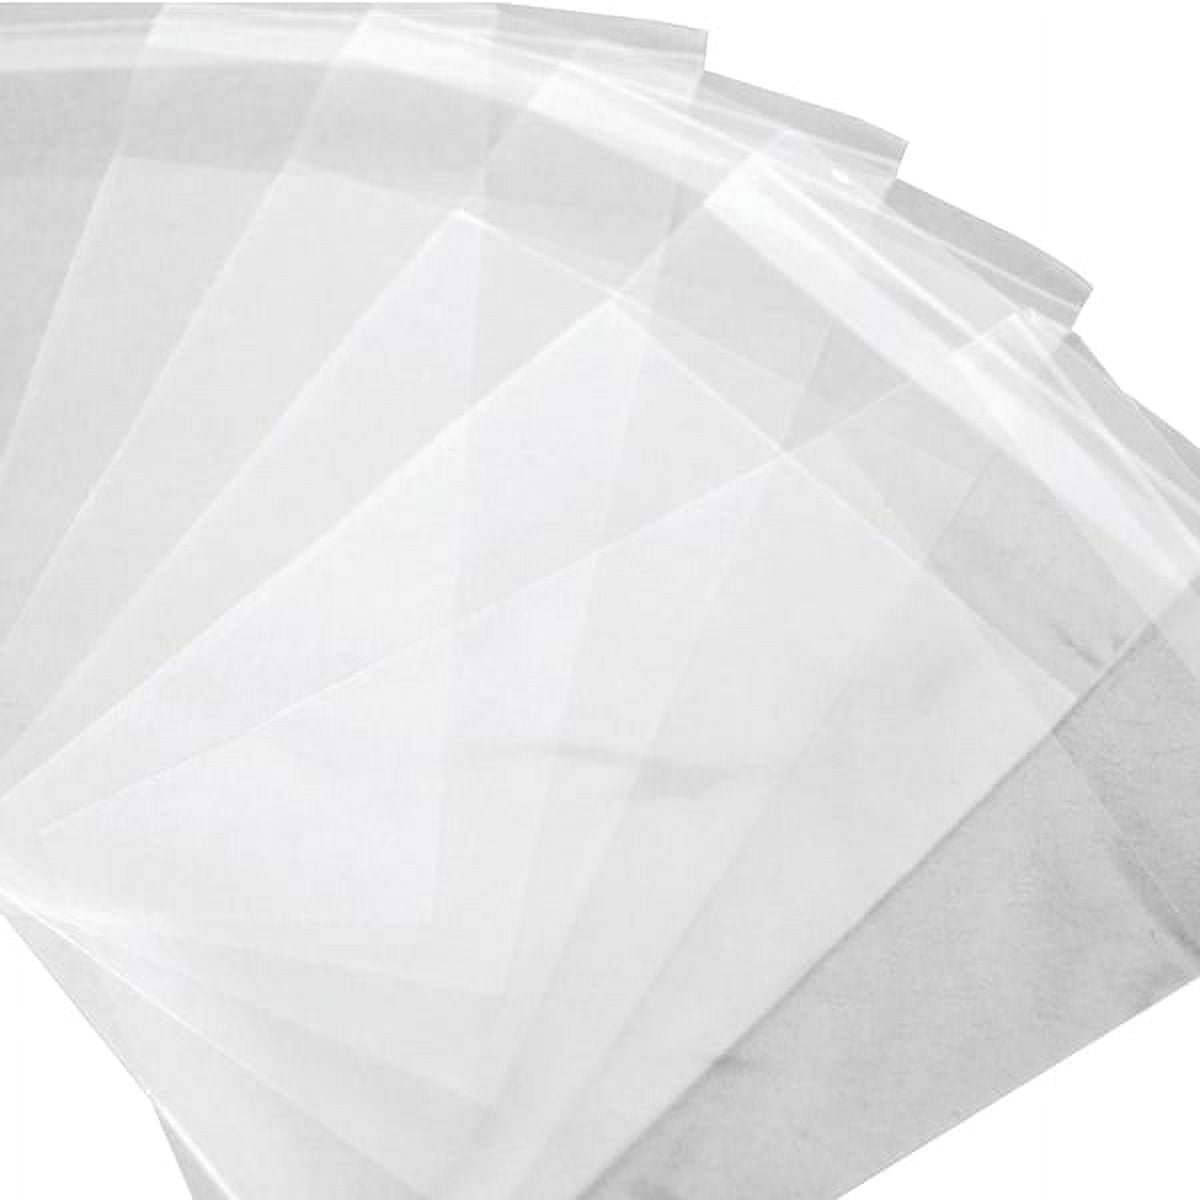 Pbr117 6 X 6 In. 1.5 Mil Resealable Polypropylene Bags Case, Pack Of 1000